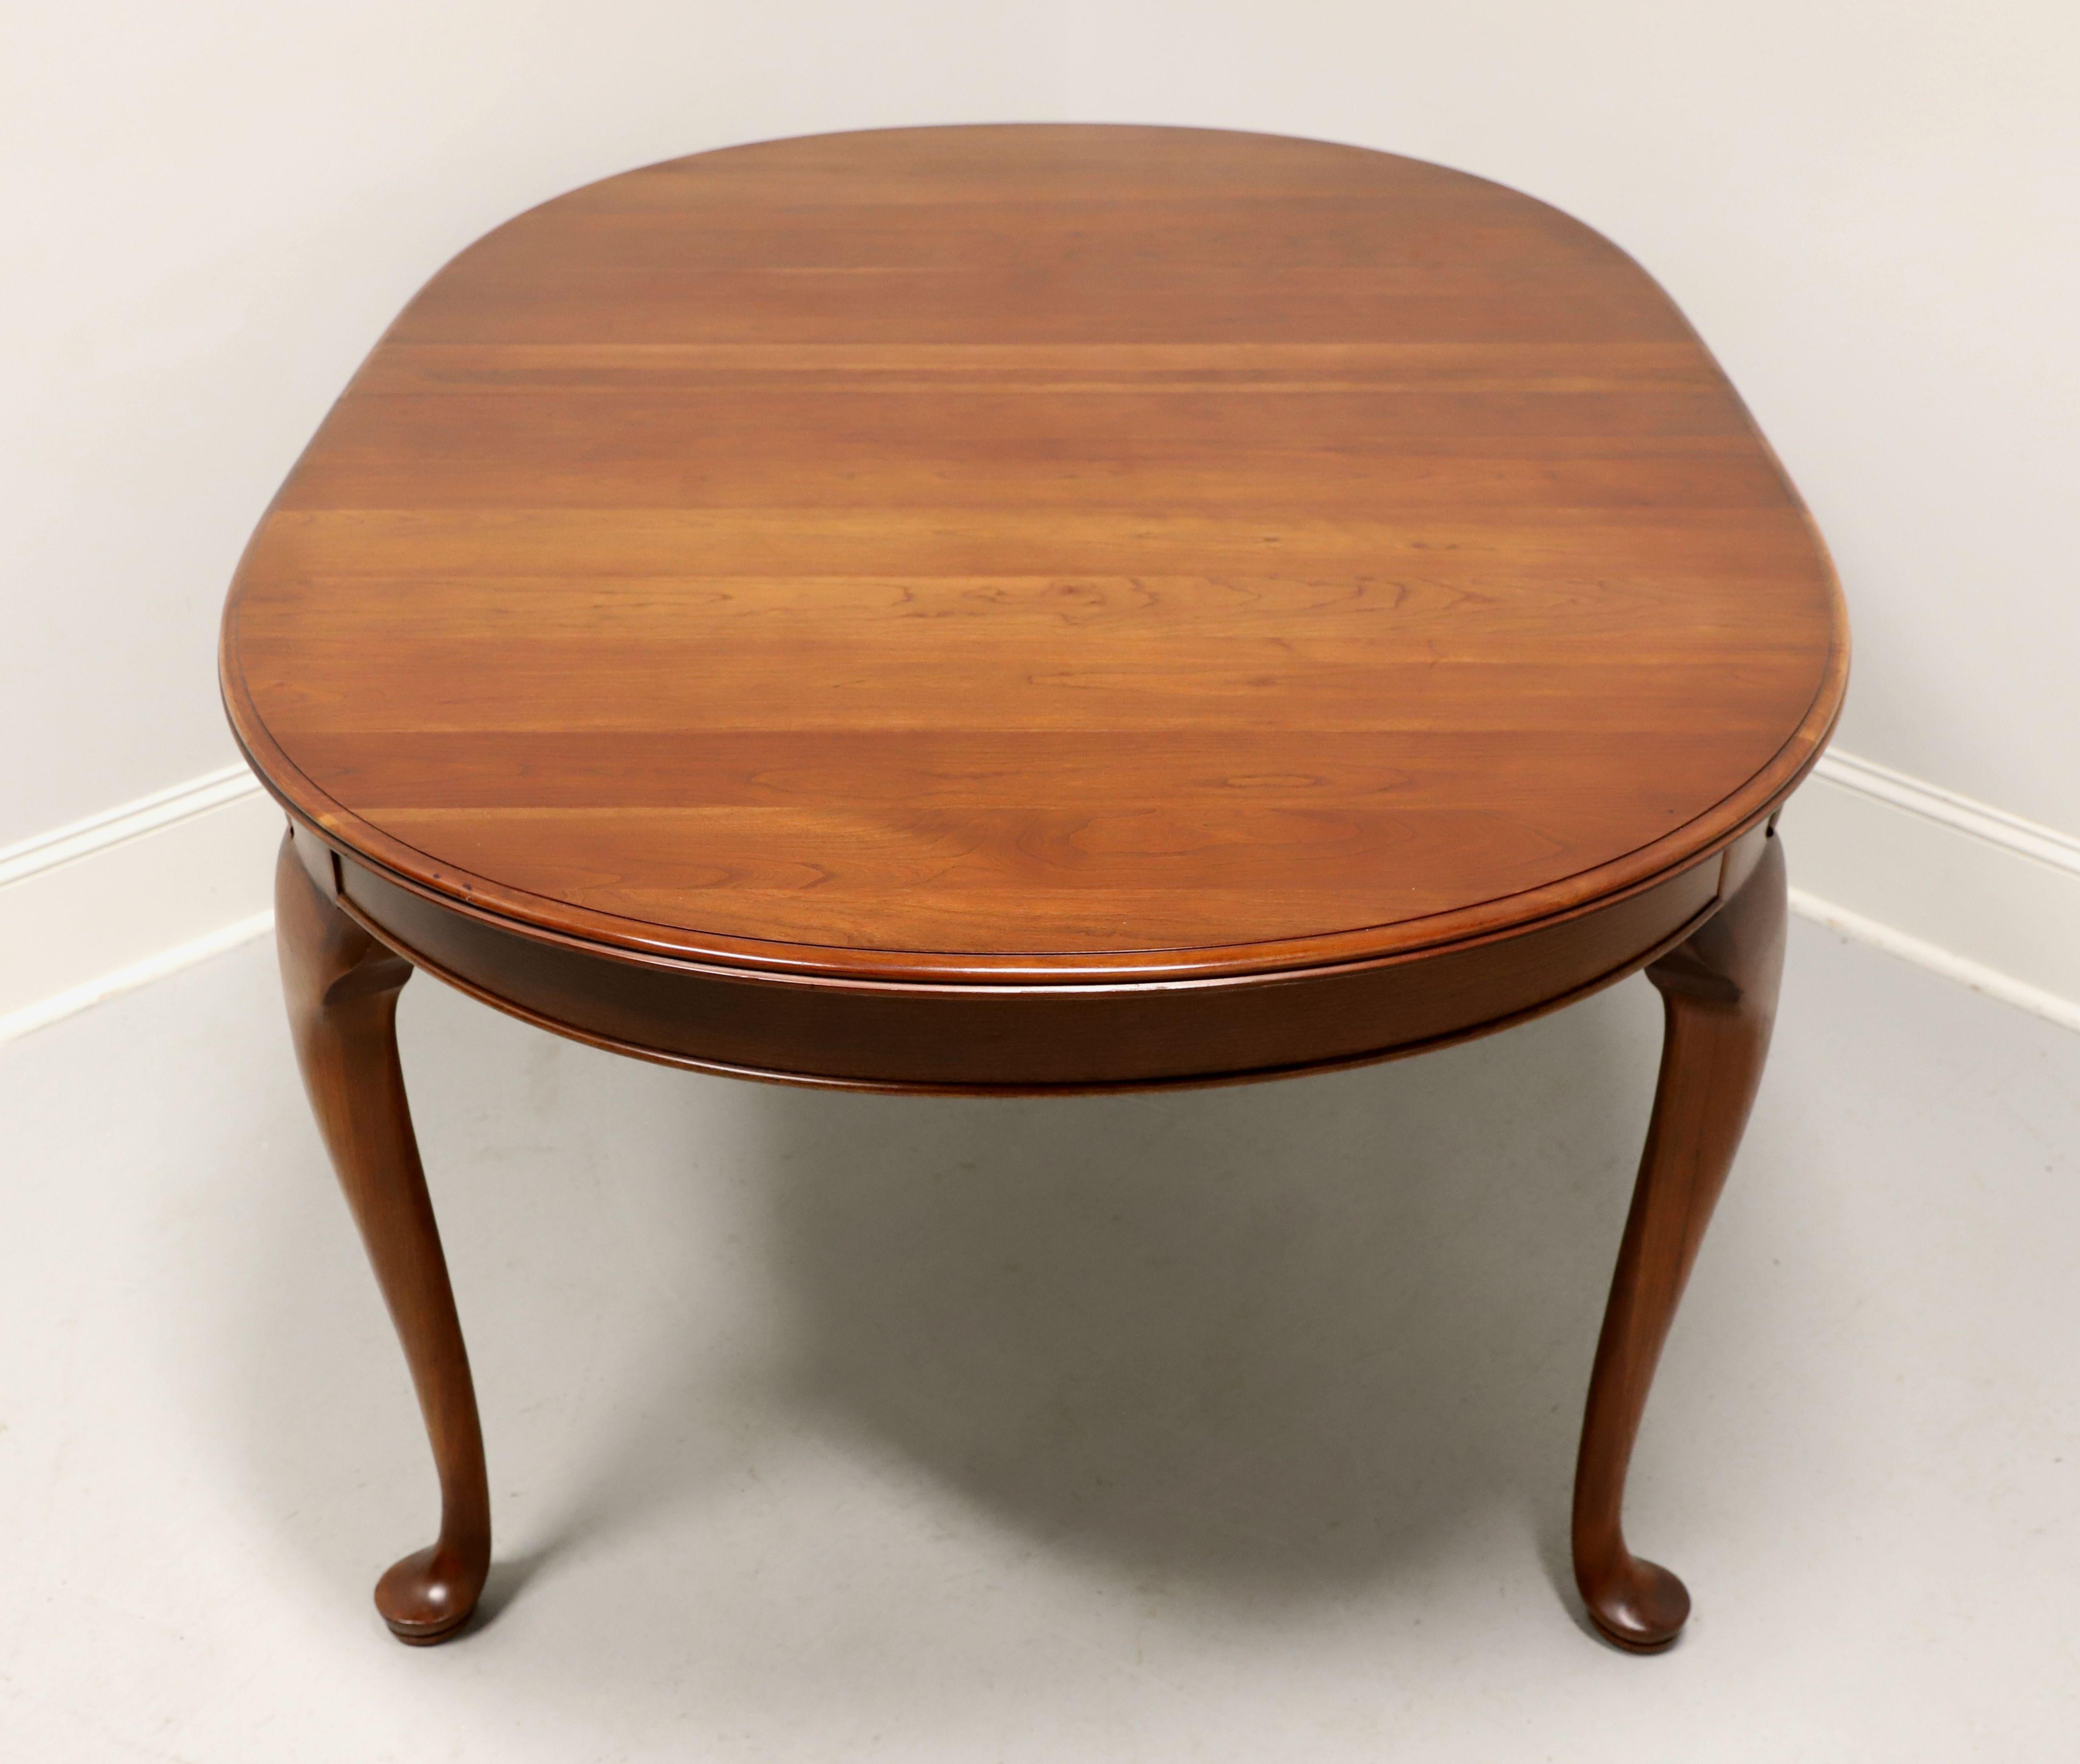 A Queen Anne style oval dining table by Pennsylvania House. Solid cherry wood, bevel edge to the top, solid apron, carved knees, cabriole legs and pad feet. Includes three 10 inch extension leaves for placement on wood expansion sliders. Made in the